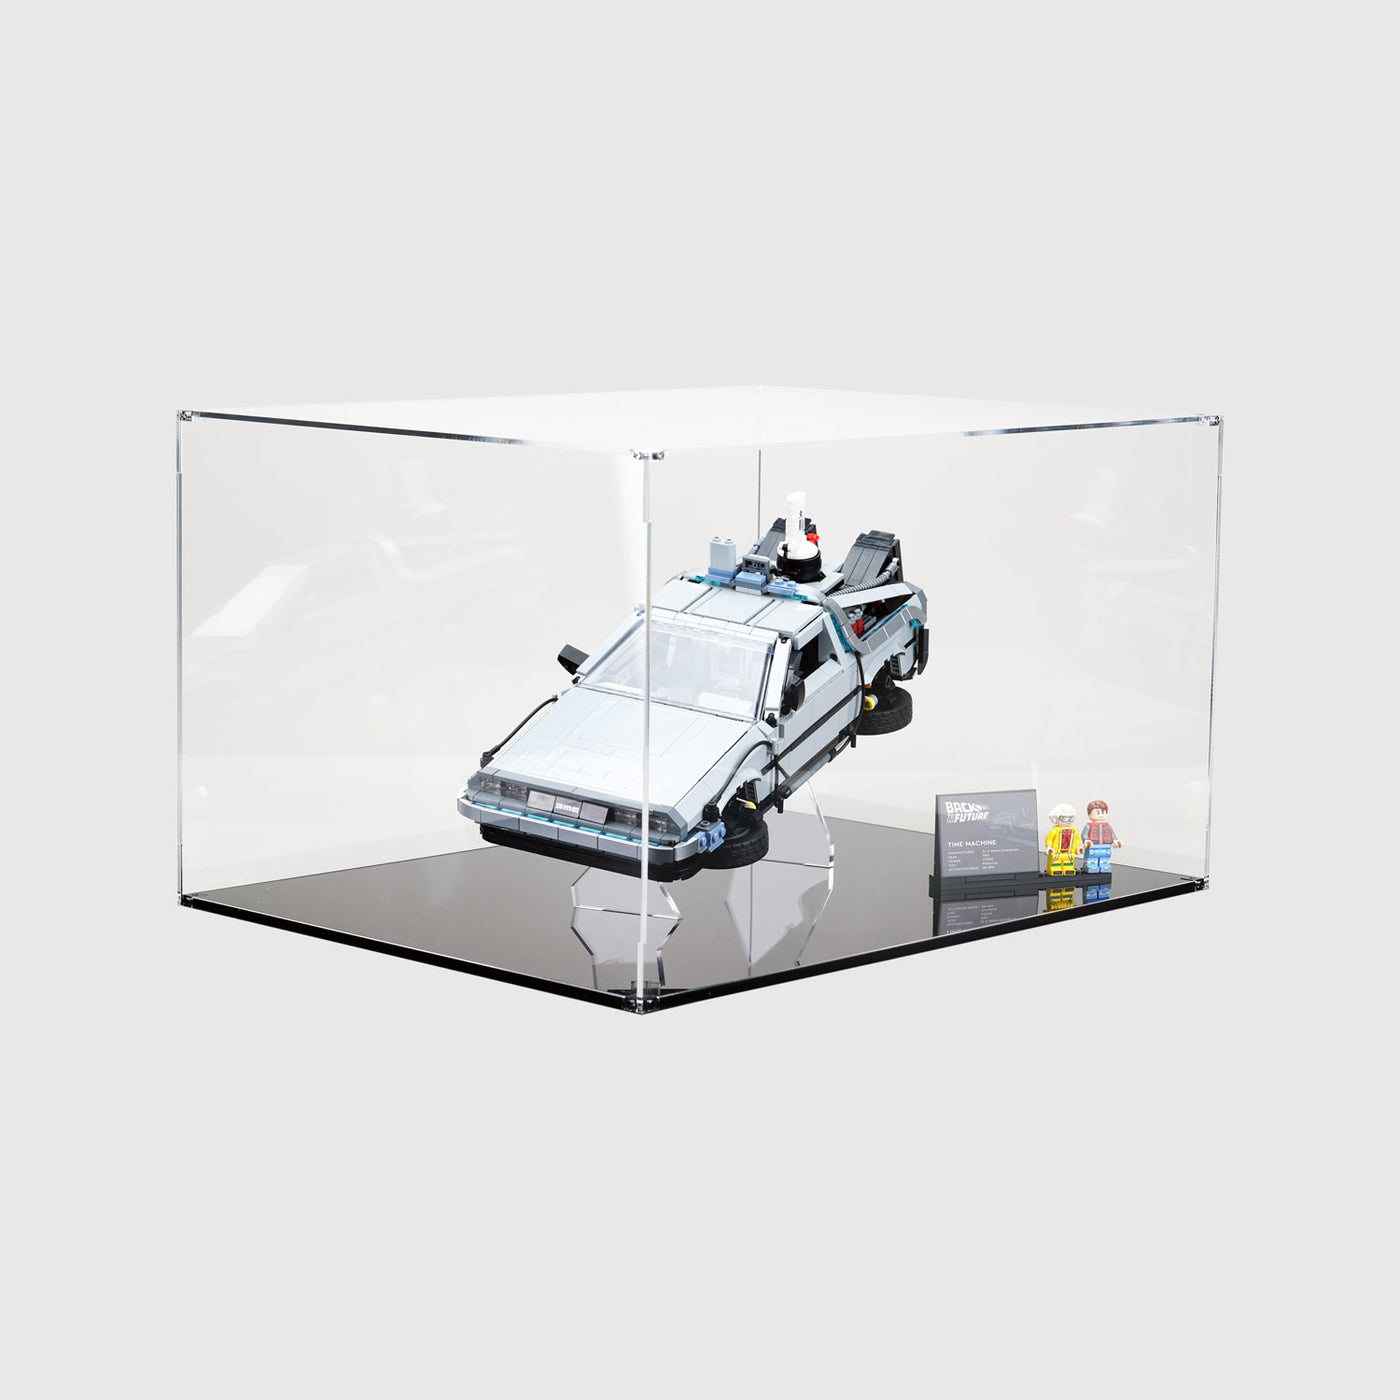 LEGO 10300 Back to the Future Time Machine Display Case | ONBRICK